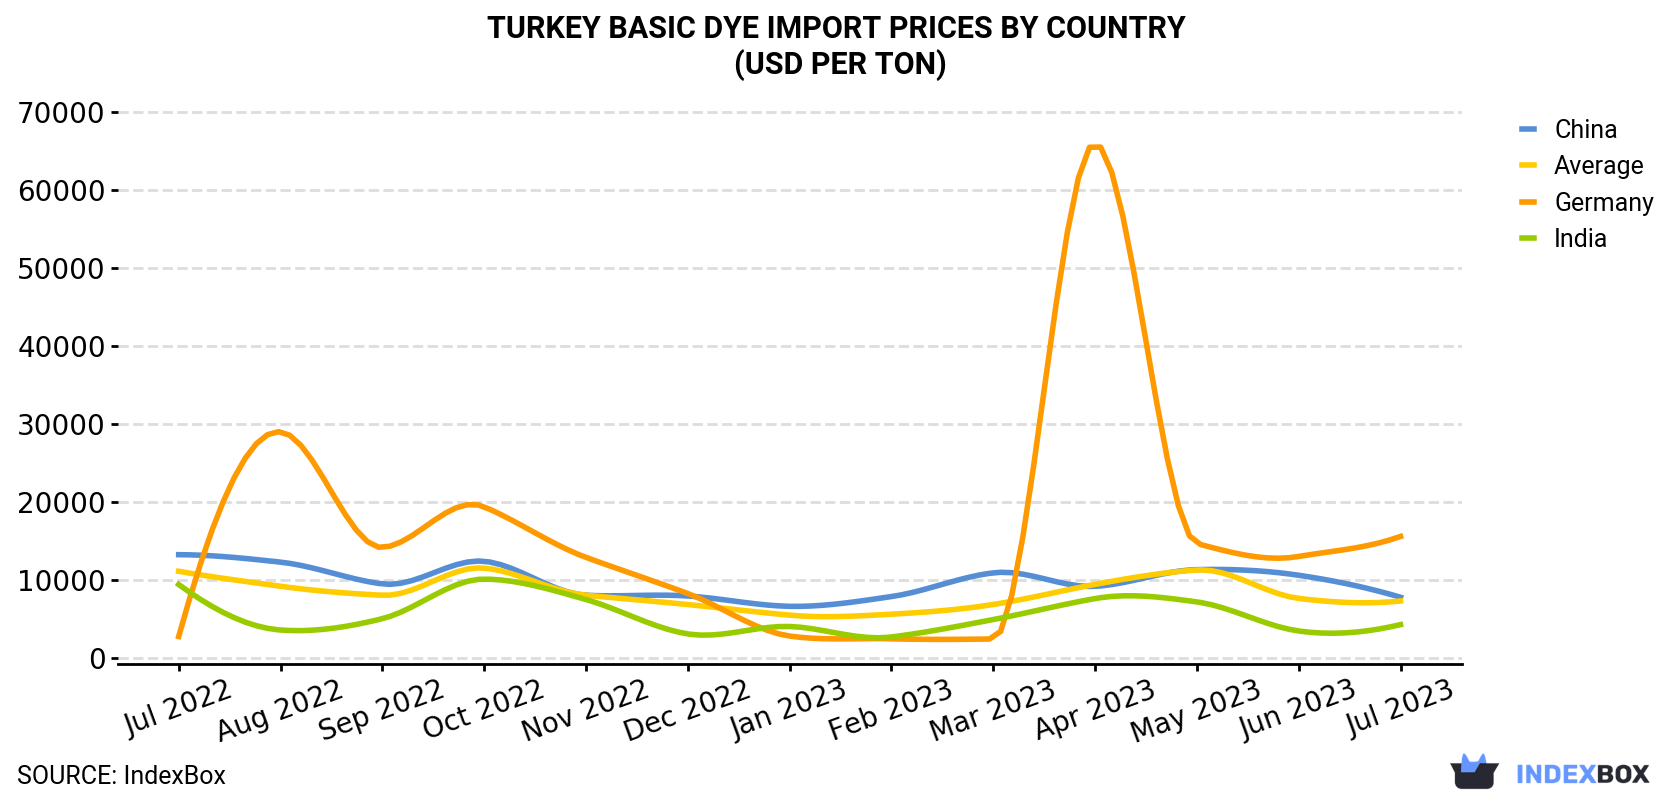 Turkey Basic Dye Import Prices By Country (USD Per Ton)